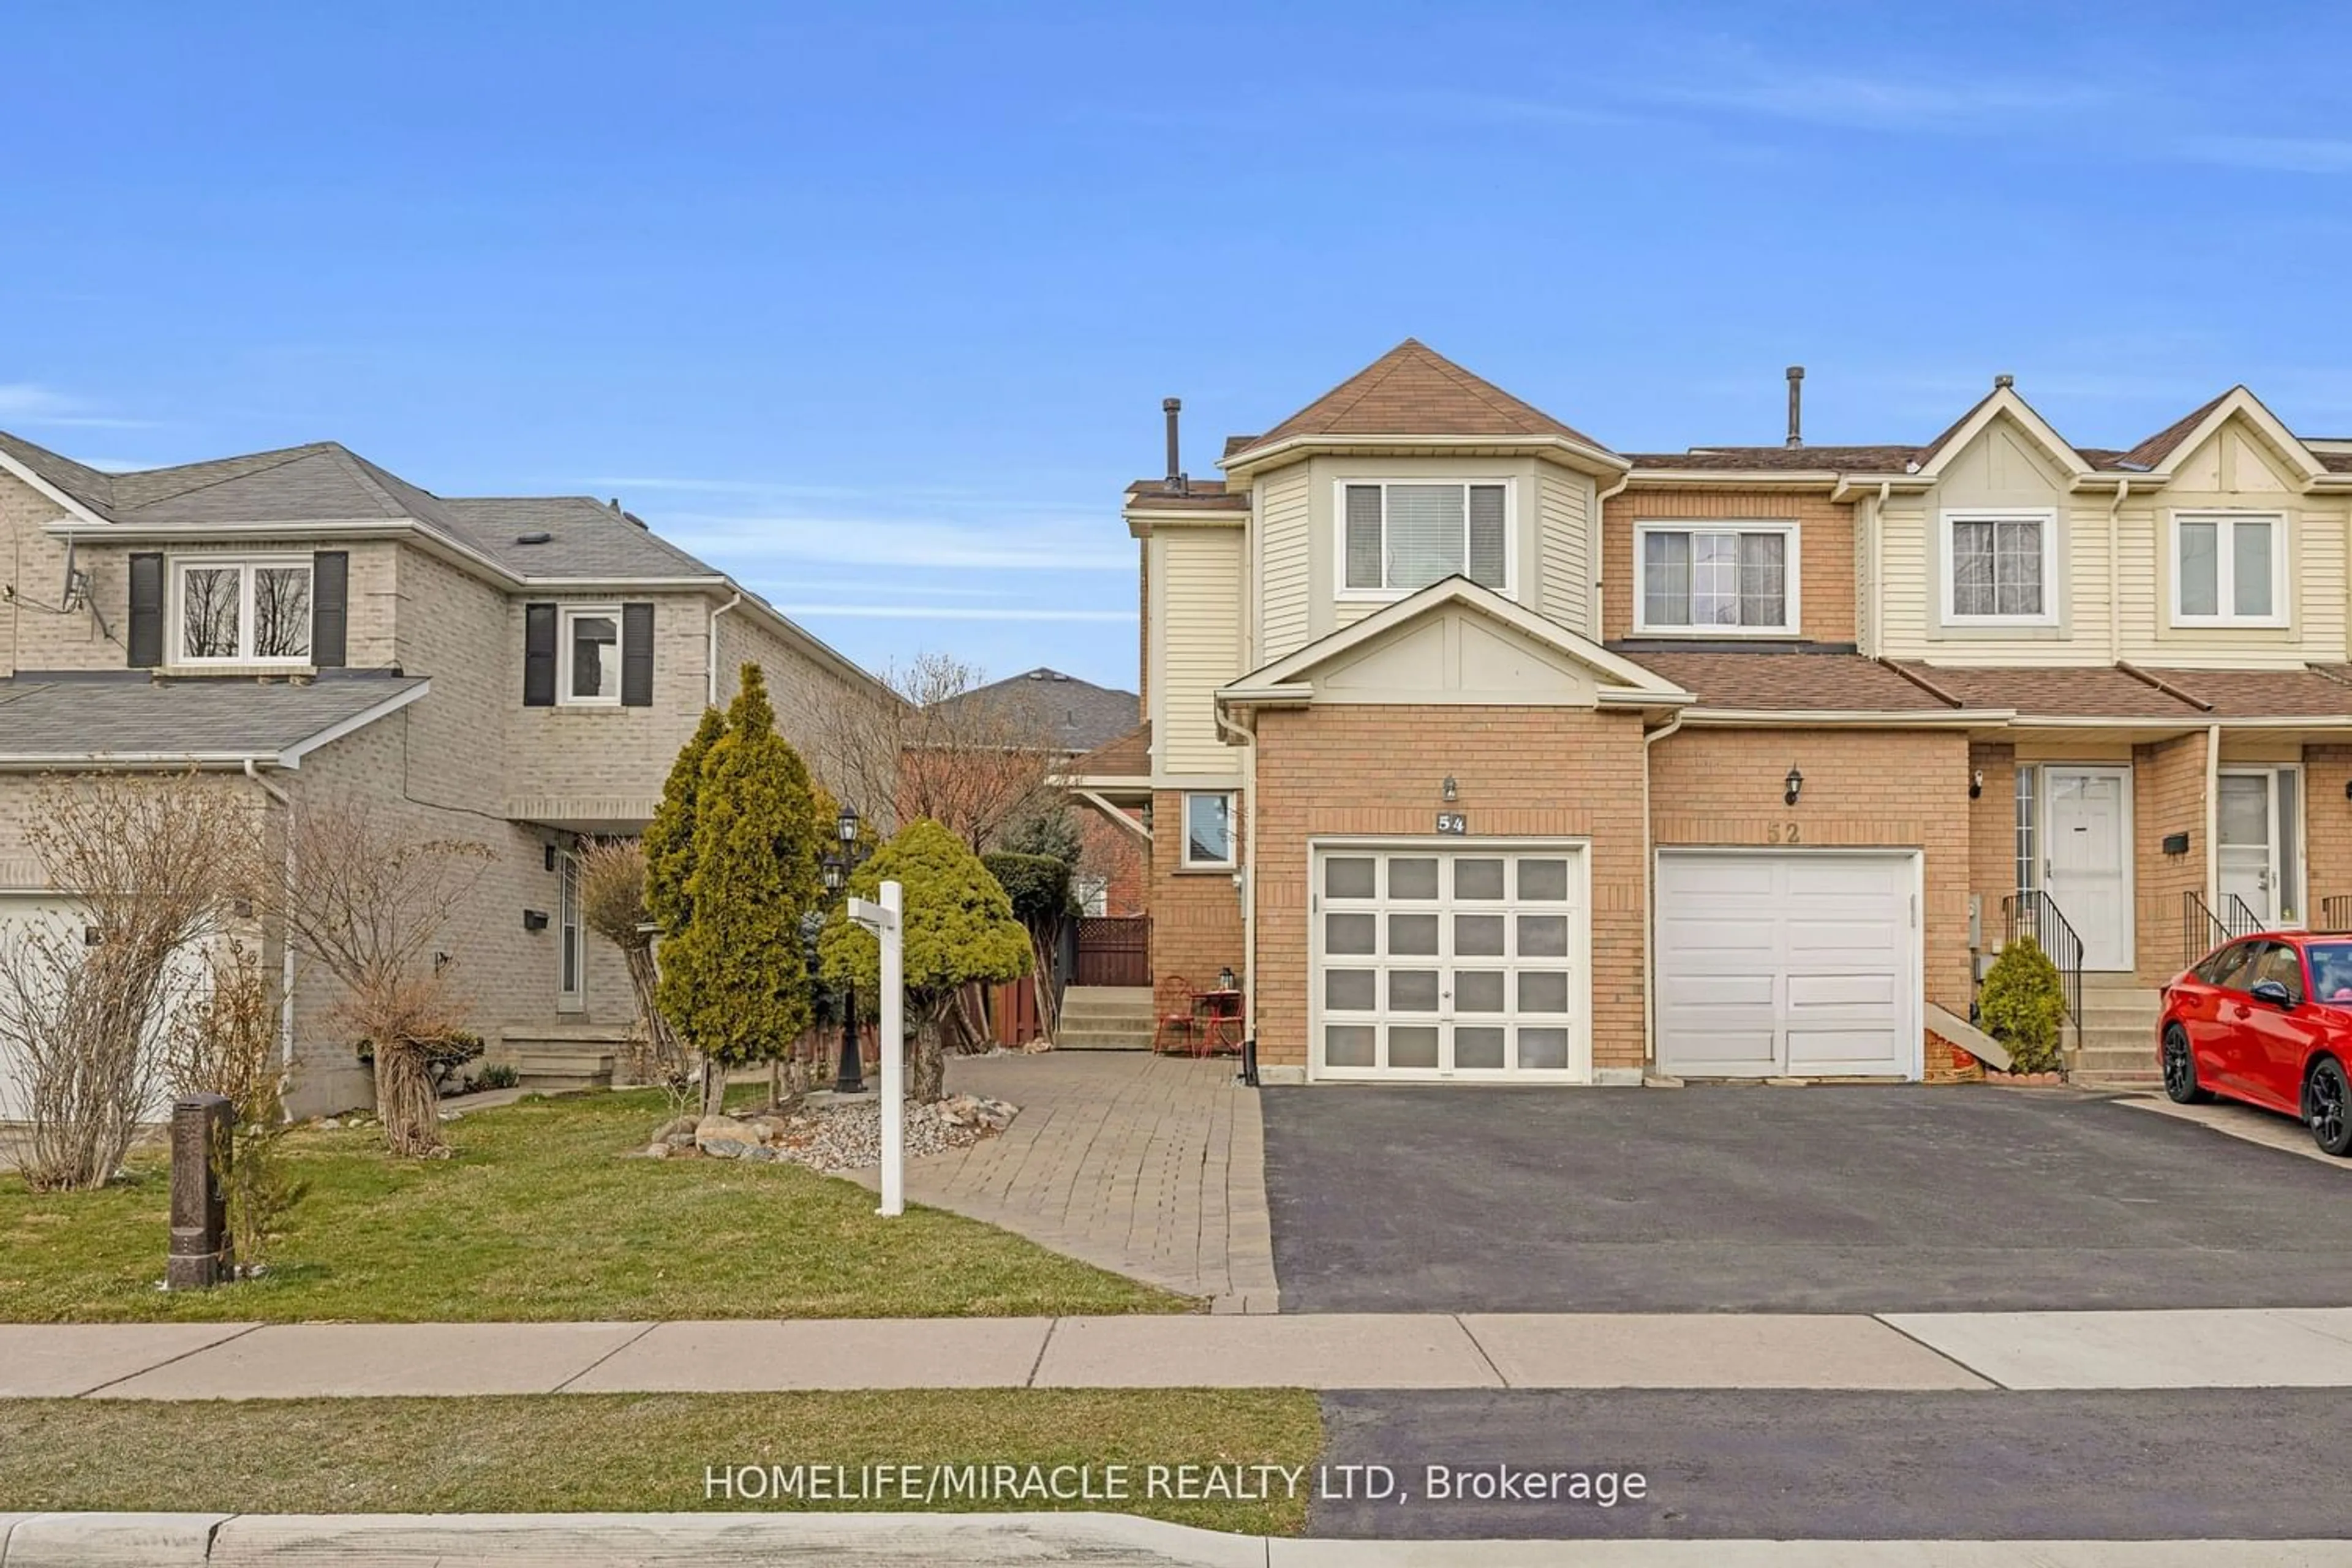 Frontside or backside of a home for 54 Millstone Dr, Brampton Ontario L6Y 4P5